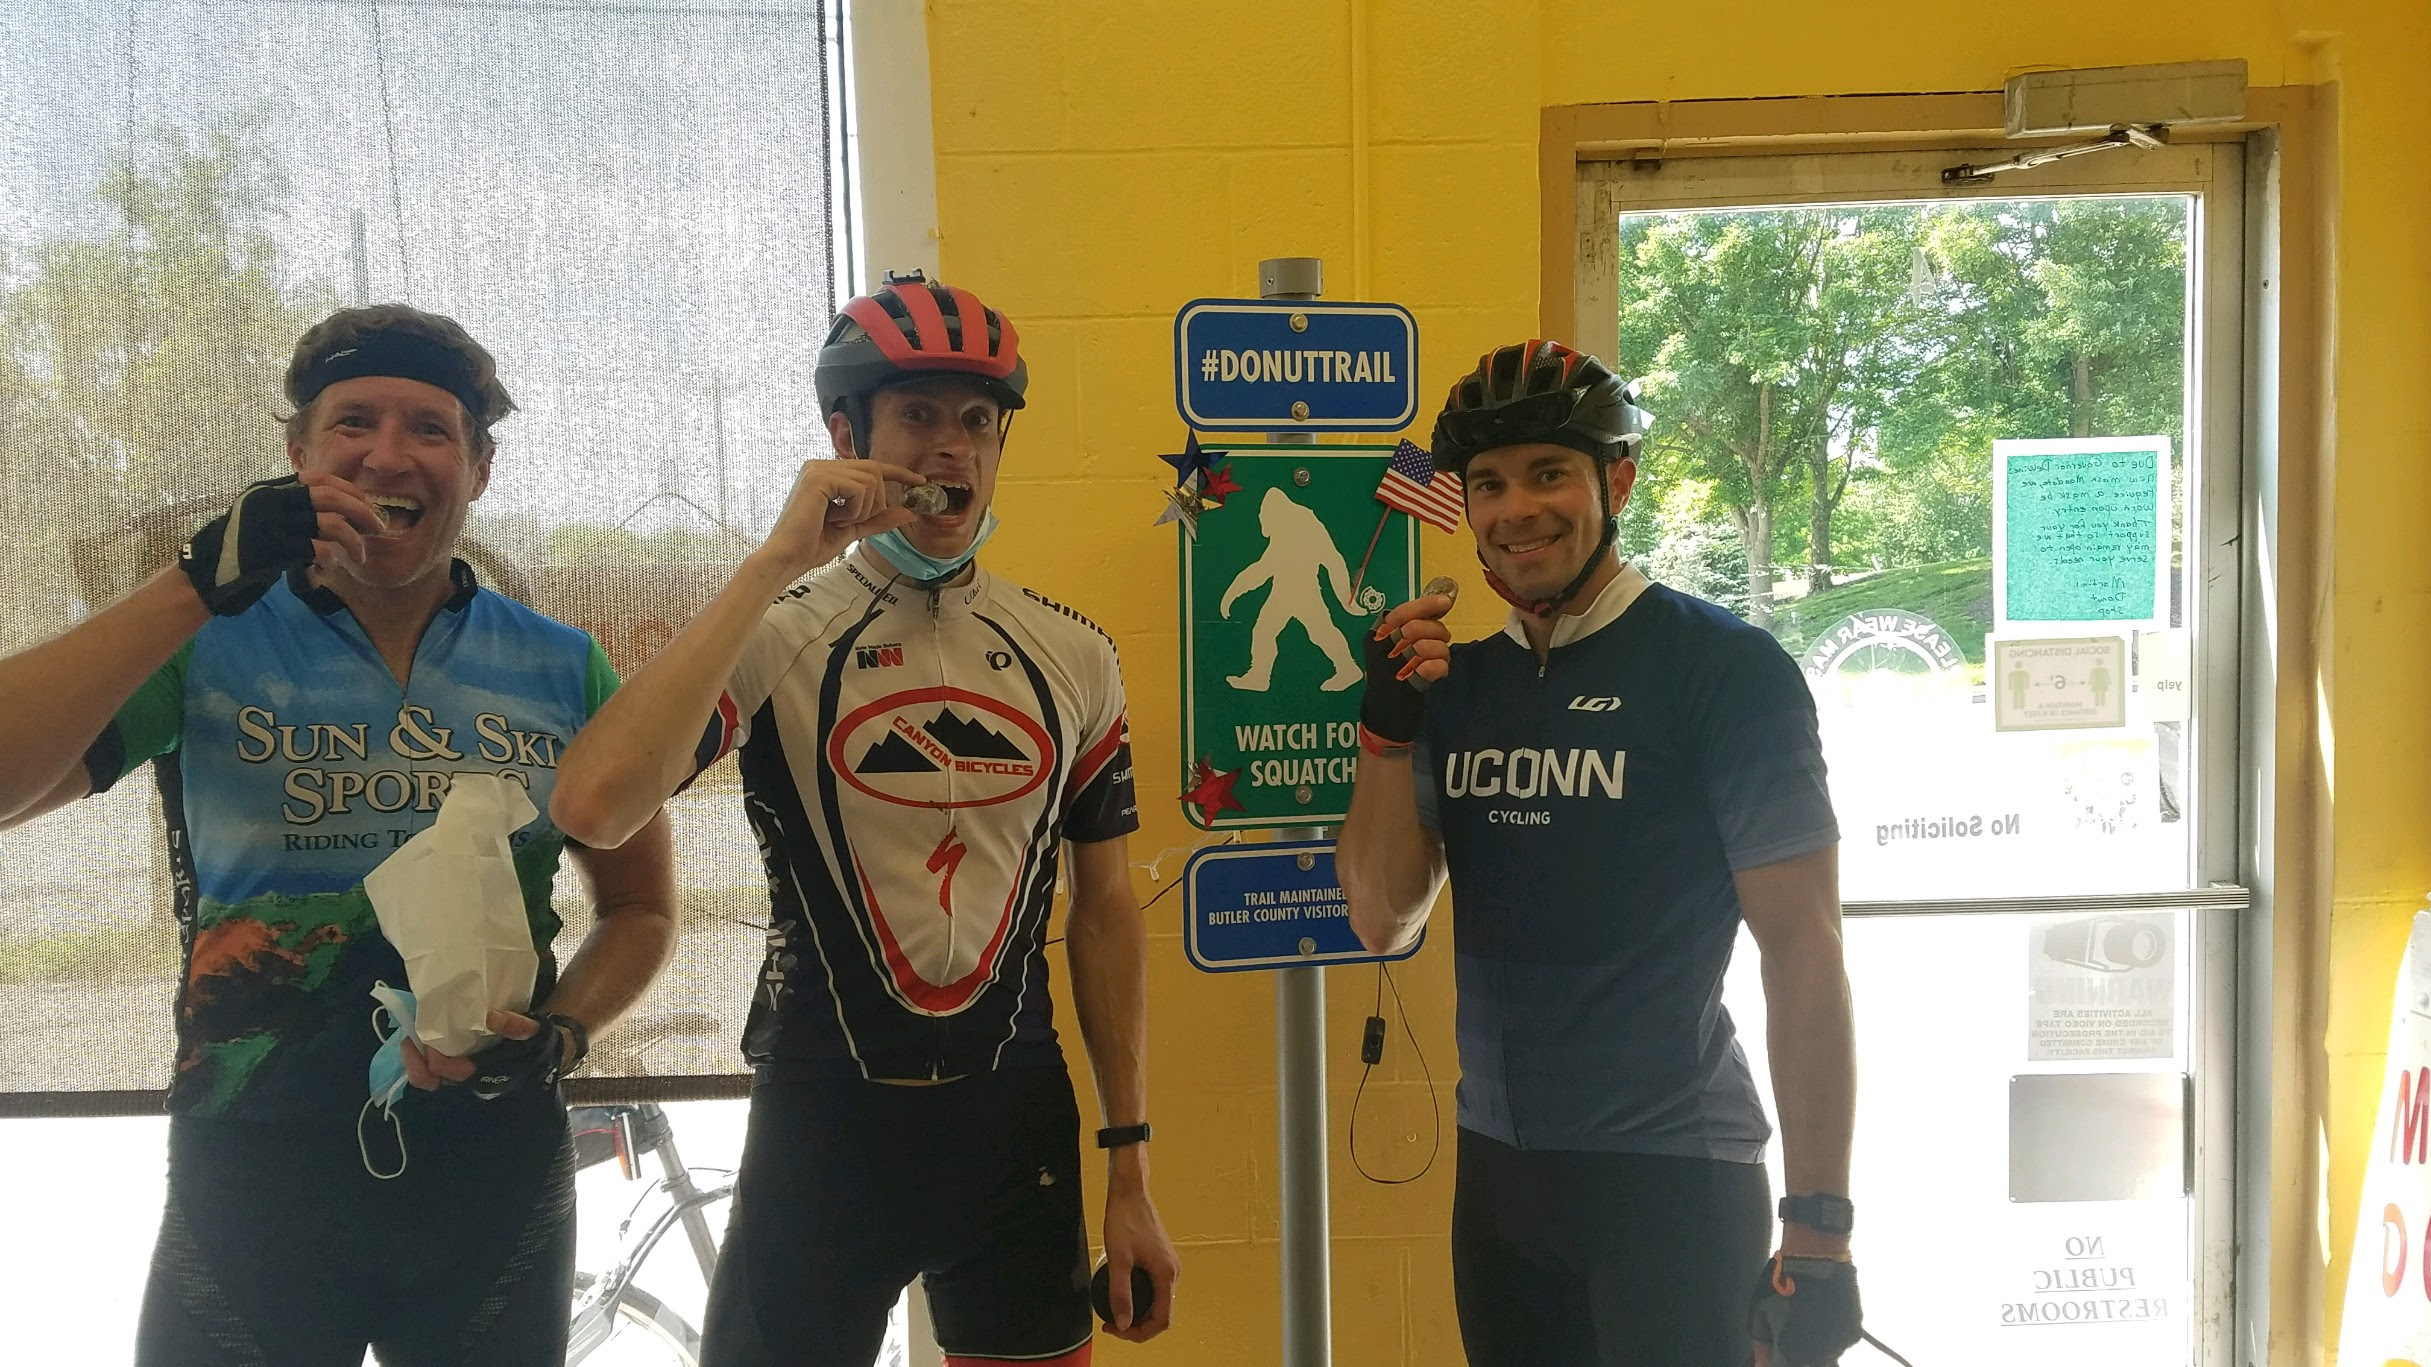 Kinesiology faculty members Kyle Timmerman, Paul Reidy, and Kevin Ballard recently rode the 85 mile Butler County Donut Trail in a single day (all 12 shops visited) to support local businesses and promote physical activity.